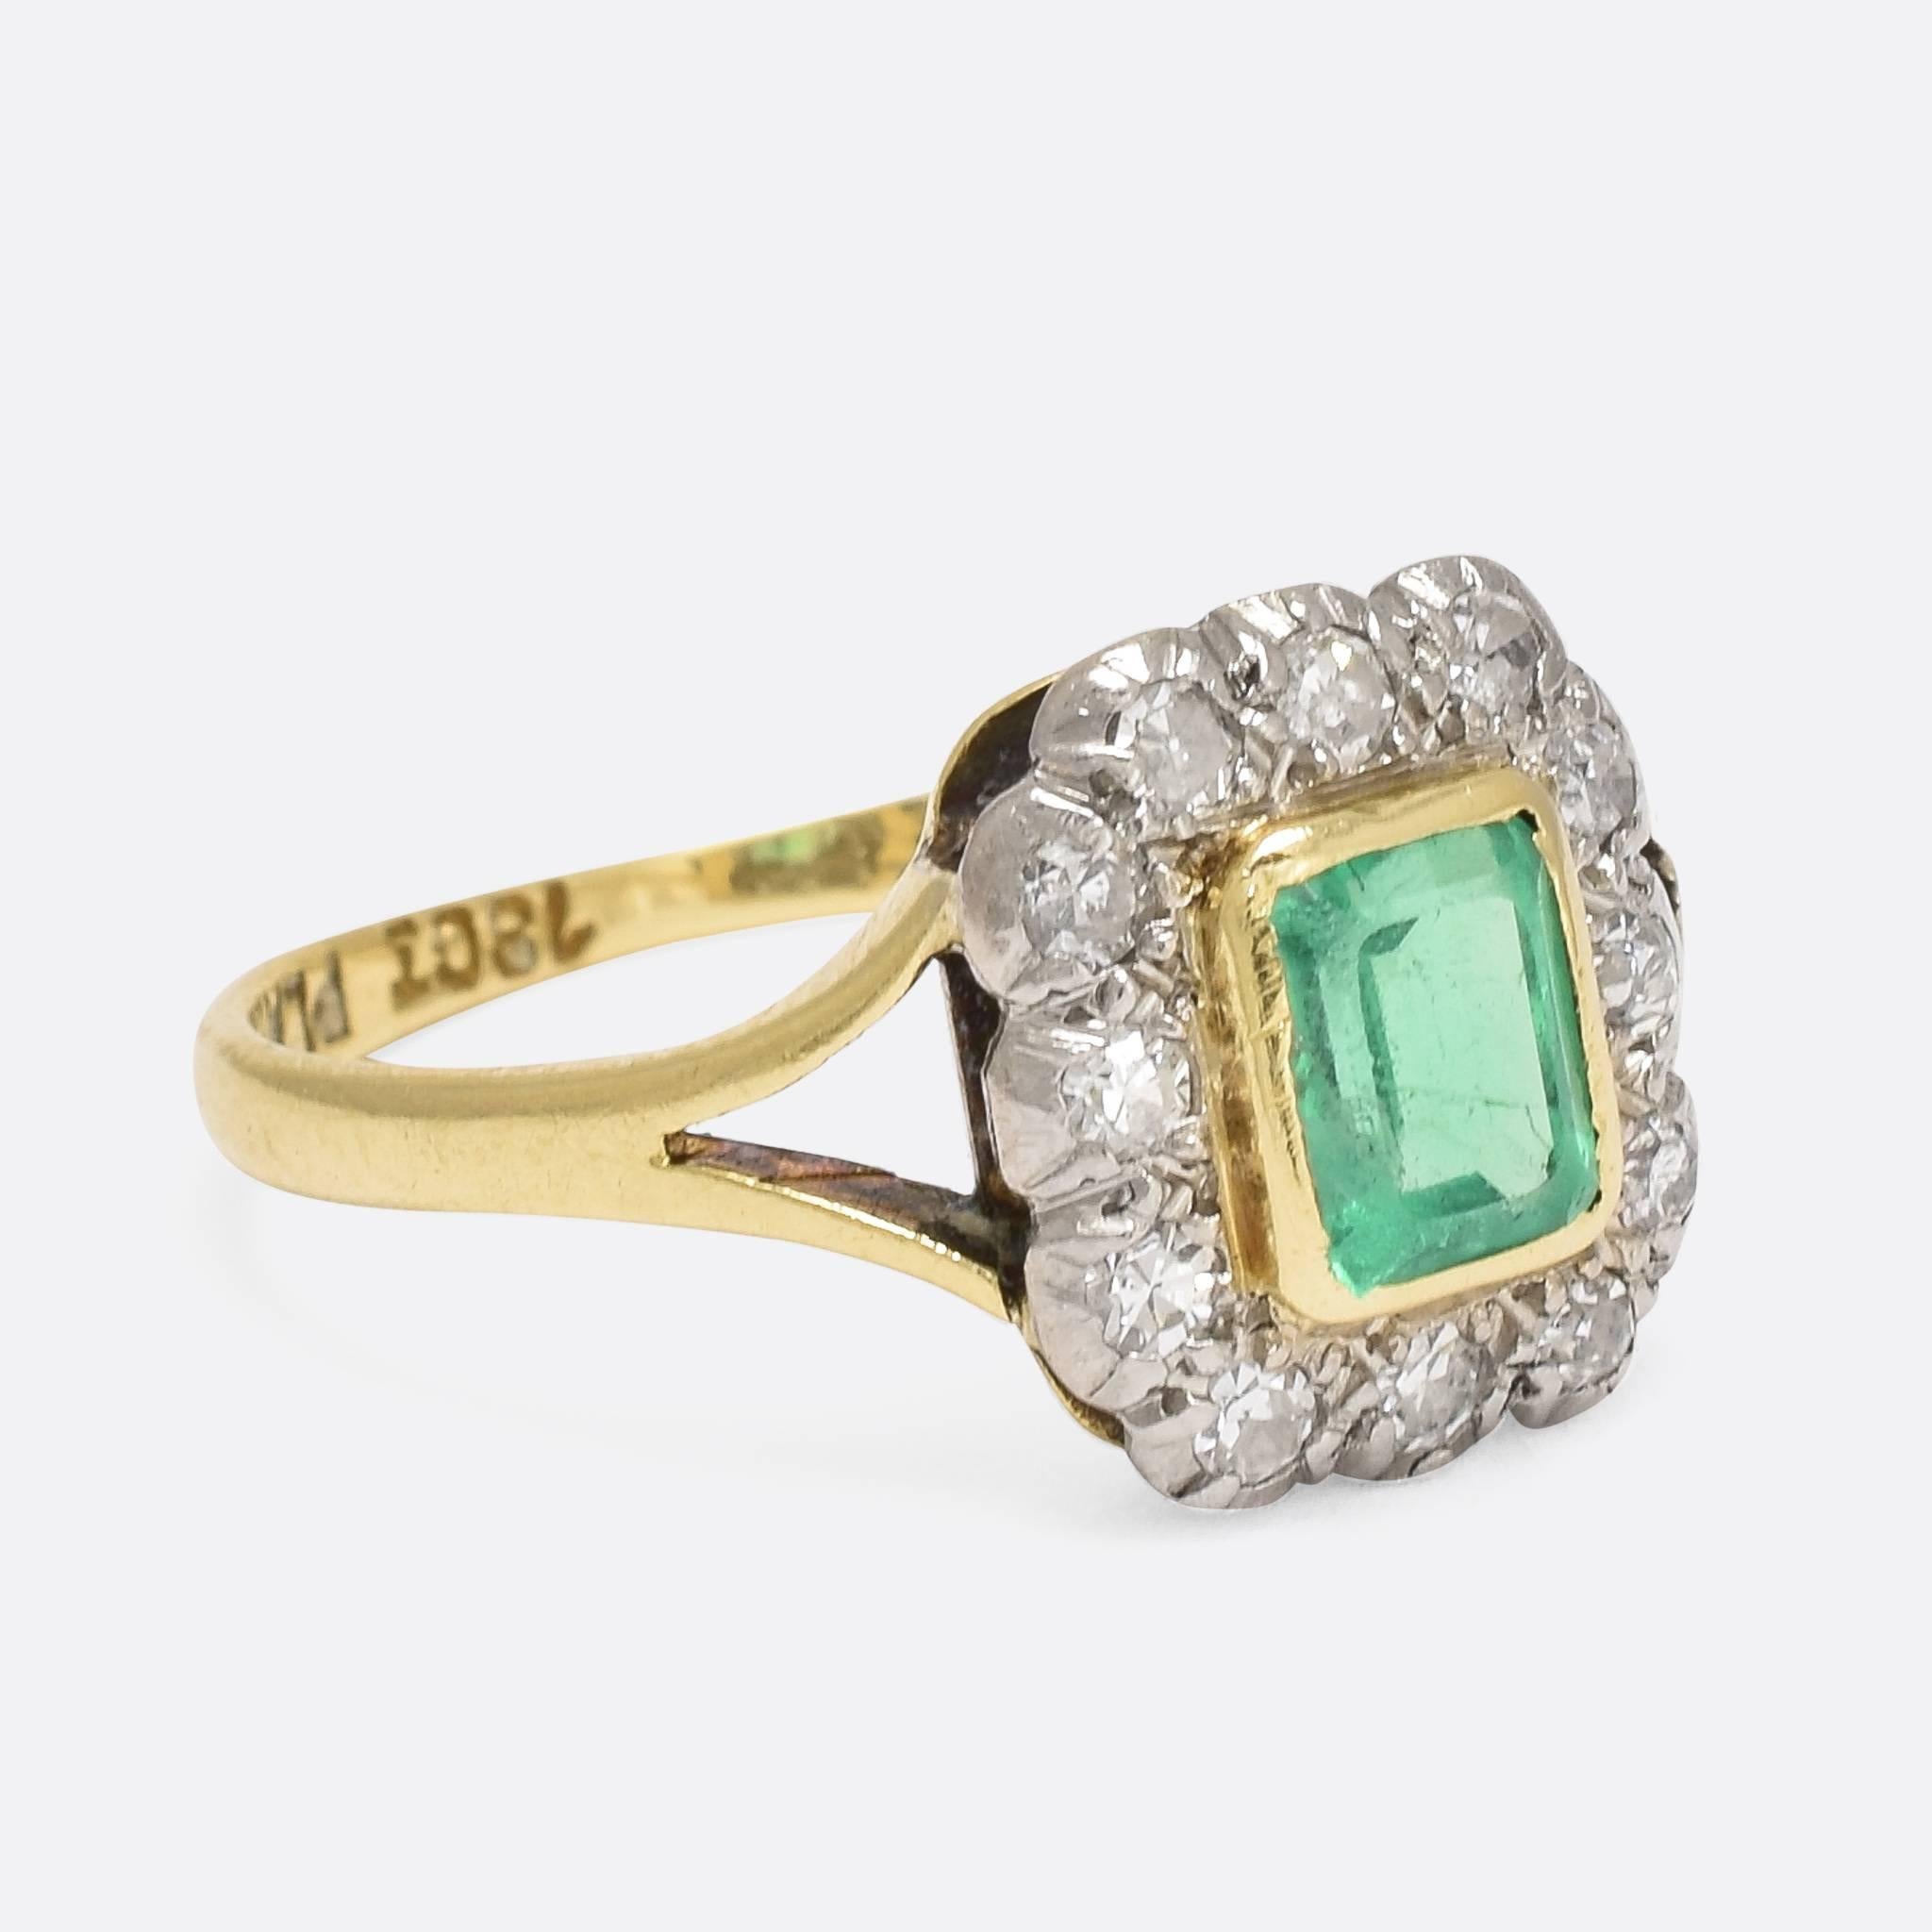 This superb antique cluster ring dates to the turn of the 20th Century. The central emerald is a striking vibrant green, in a gold rub over setting, while the diamonds are set in platinum. An open gallery and pretty bifurcated shoulders allow plenty